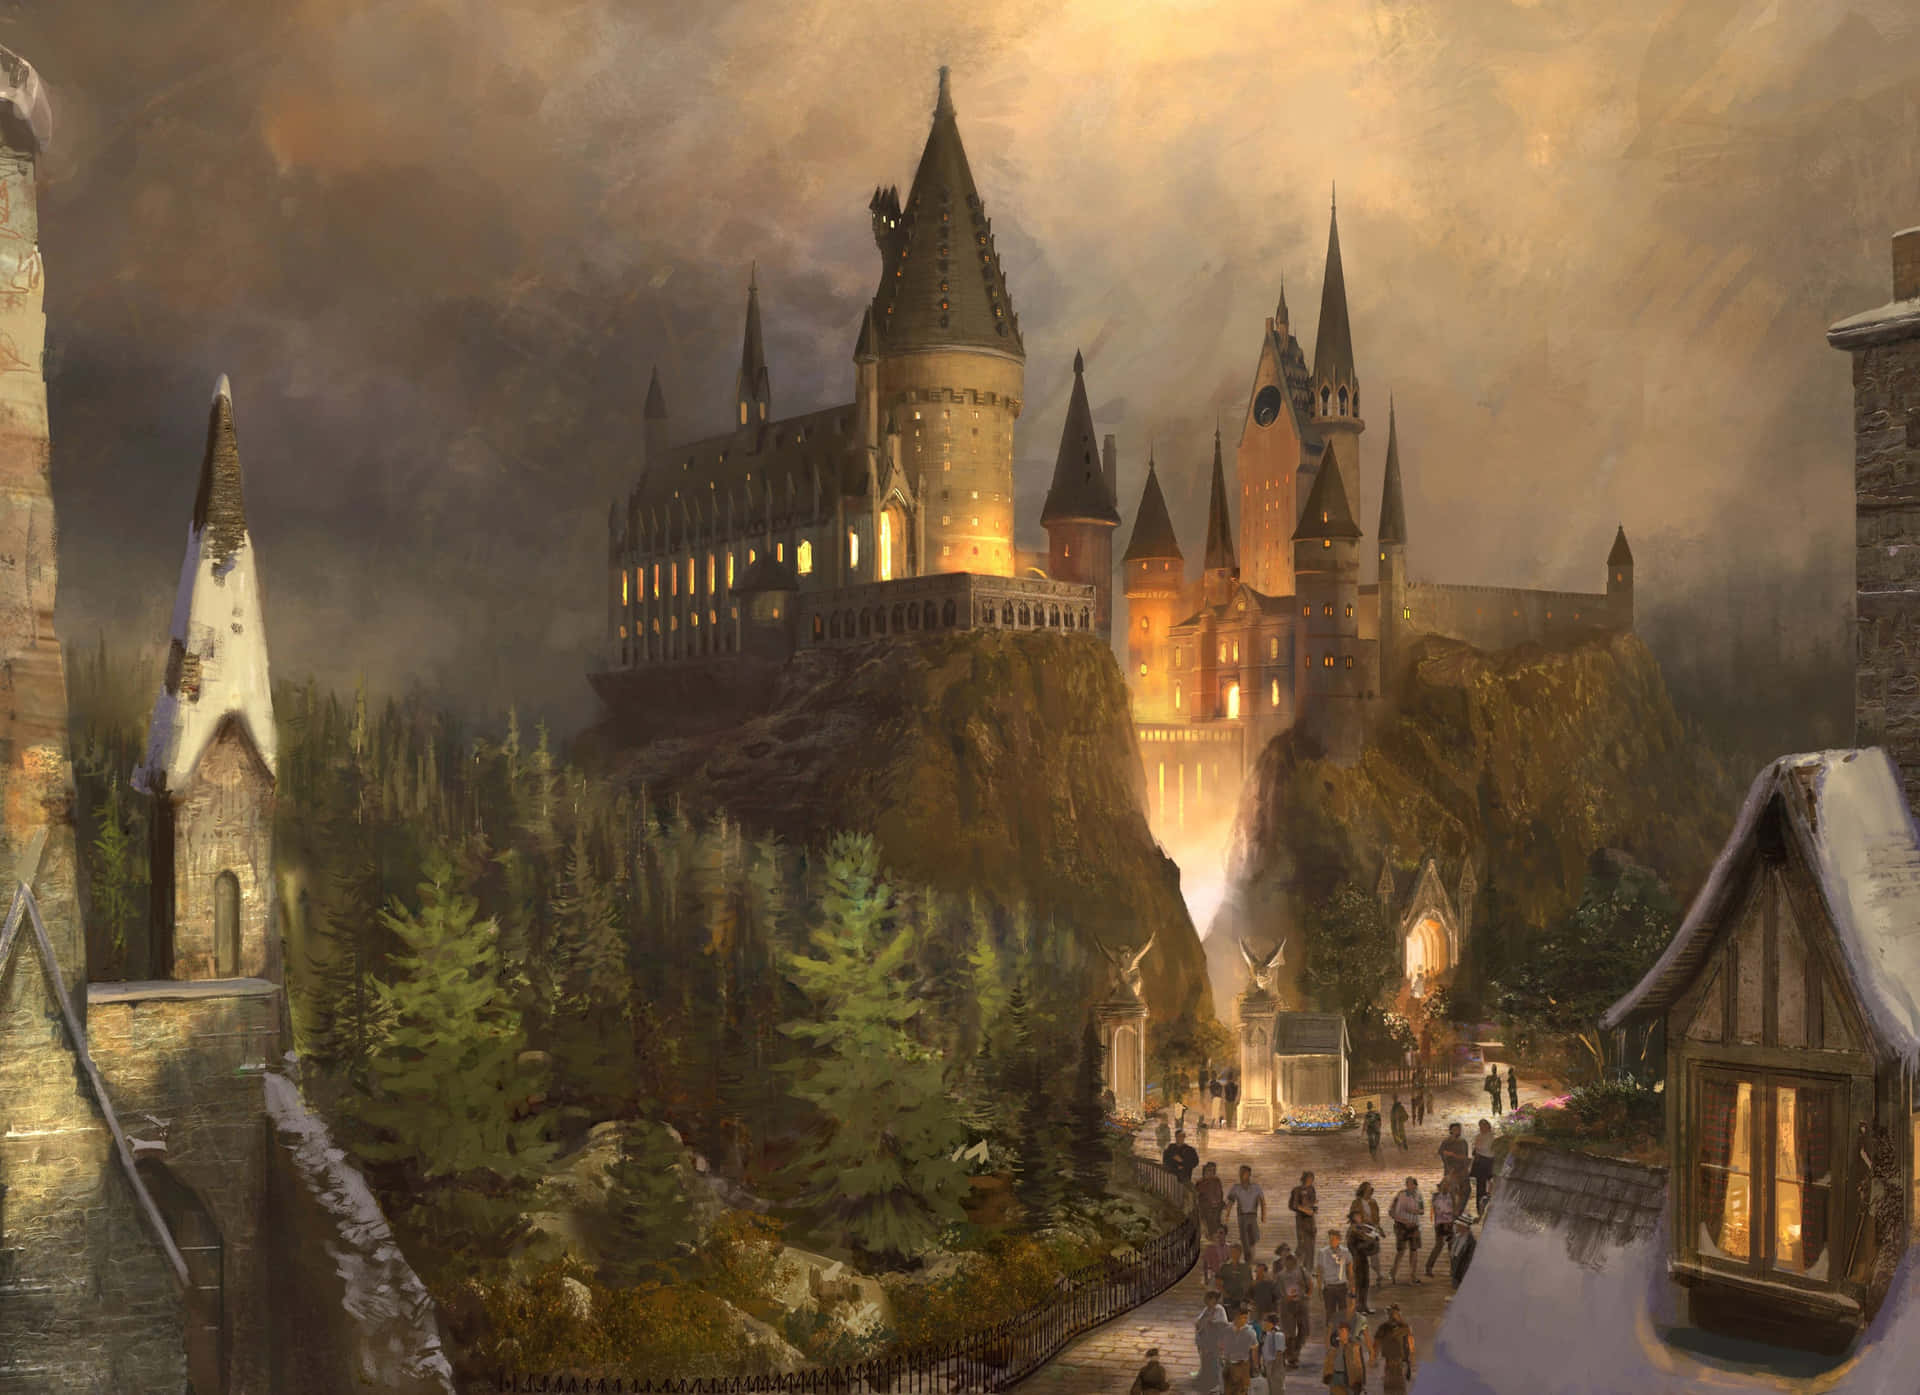 Hogwarts - The Most Magical School of Witchcraft&Wizardry